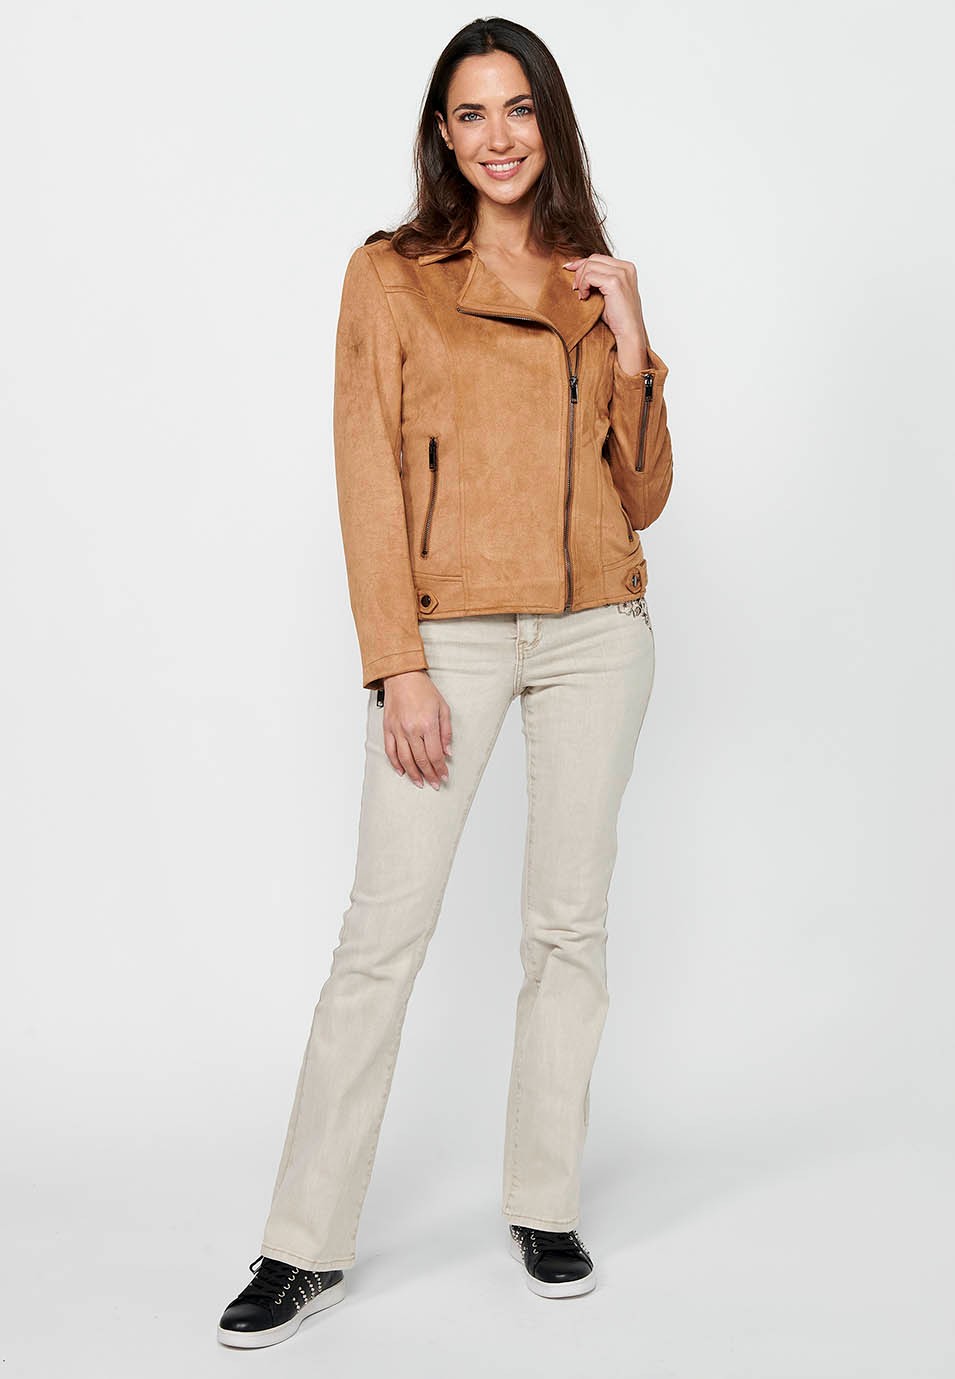 Camel Color Long Sleeve Jacket with Cross-Zip Closure with Lapel Collar and Pockets for Women 3